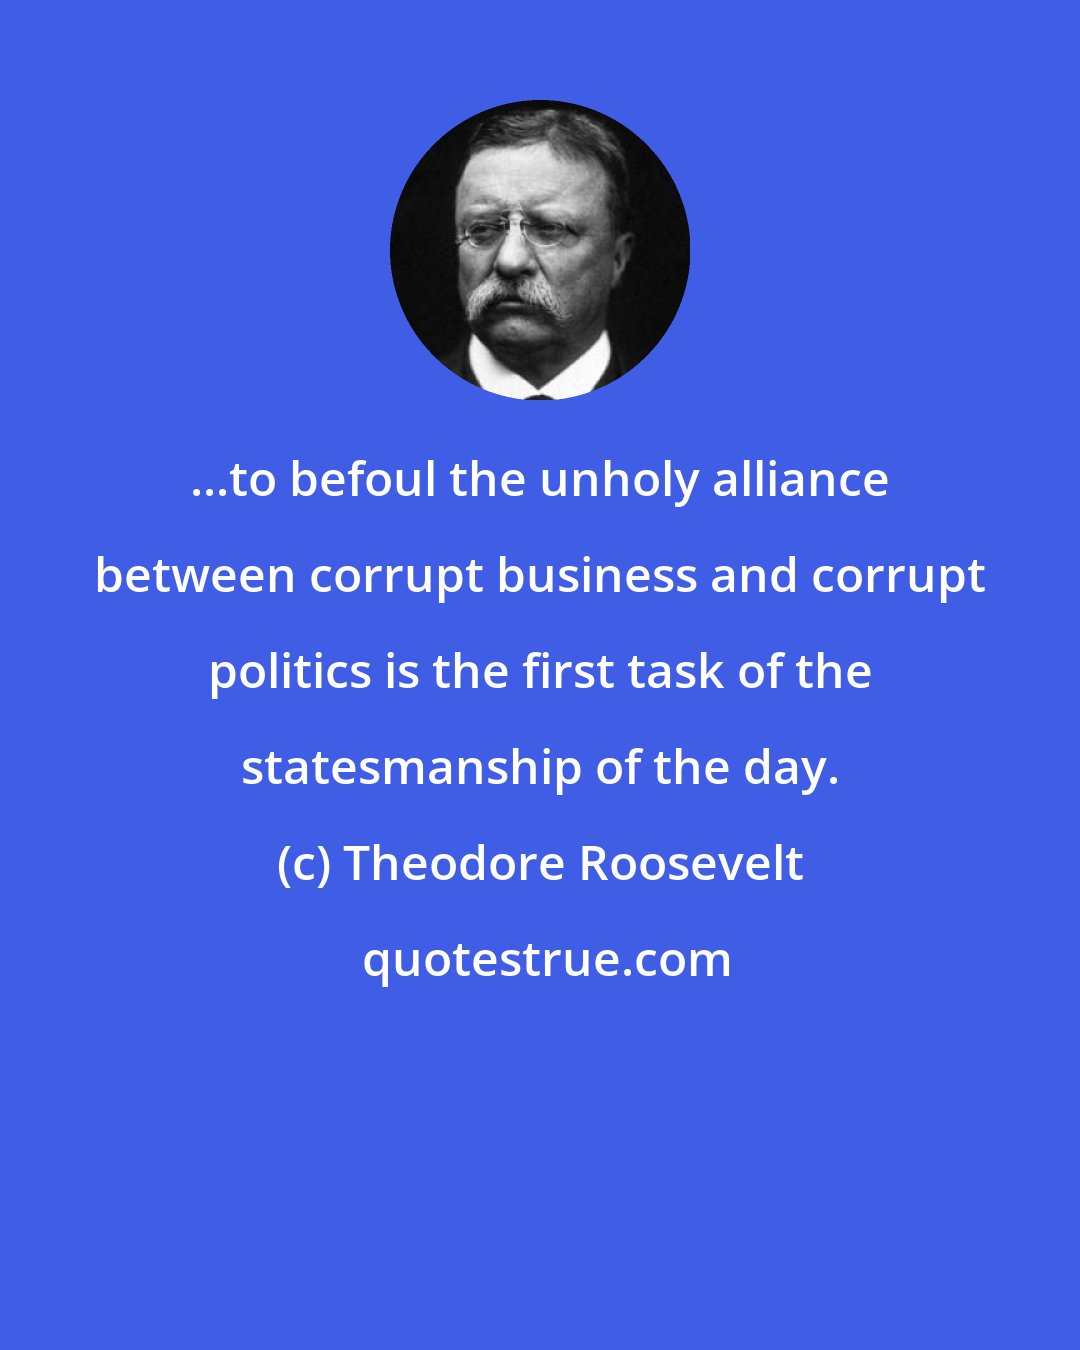 Theodore Roosevelt: ...to befoul the unholy alliance between corrupt business and corrupt politics is the first task of the statesmanship of the day.